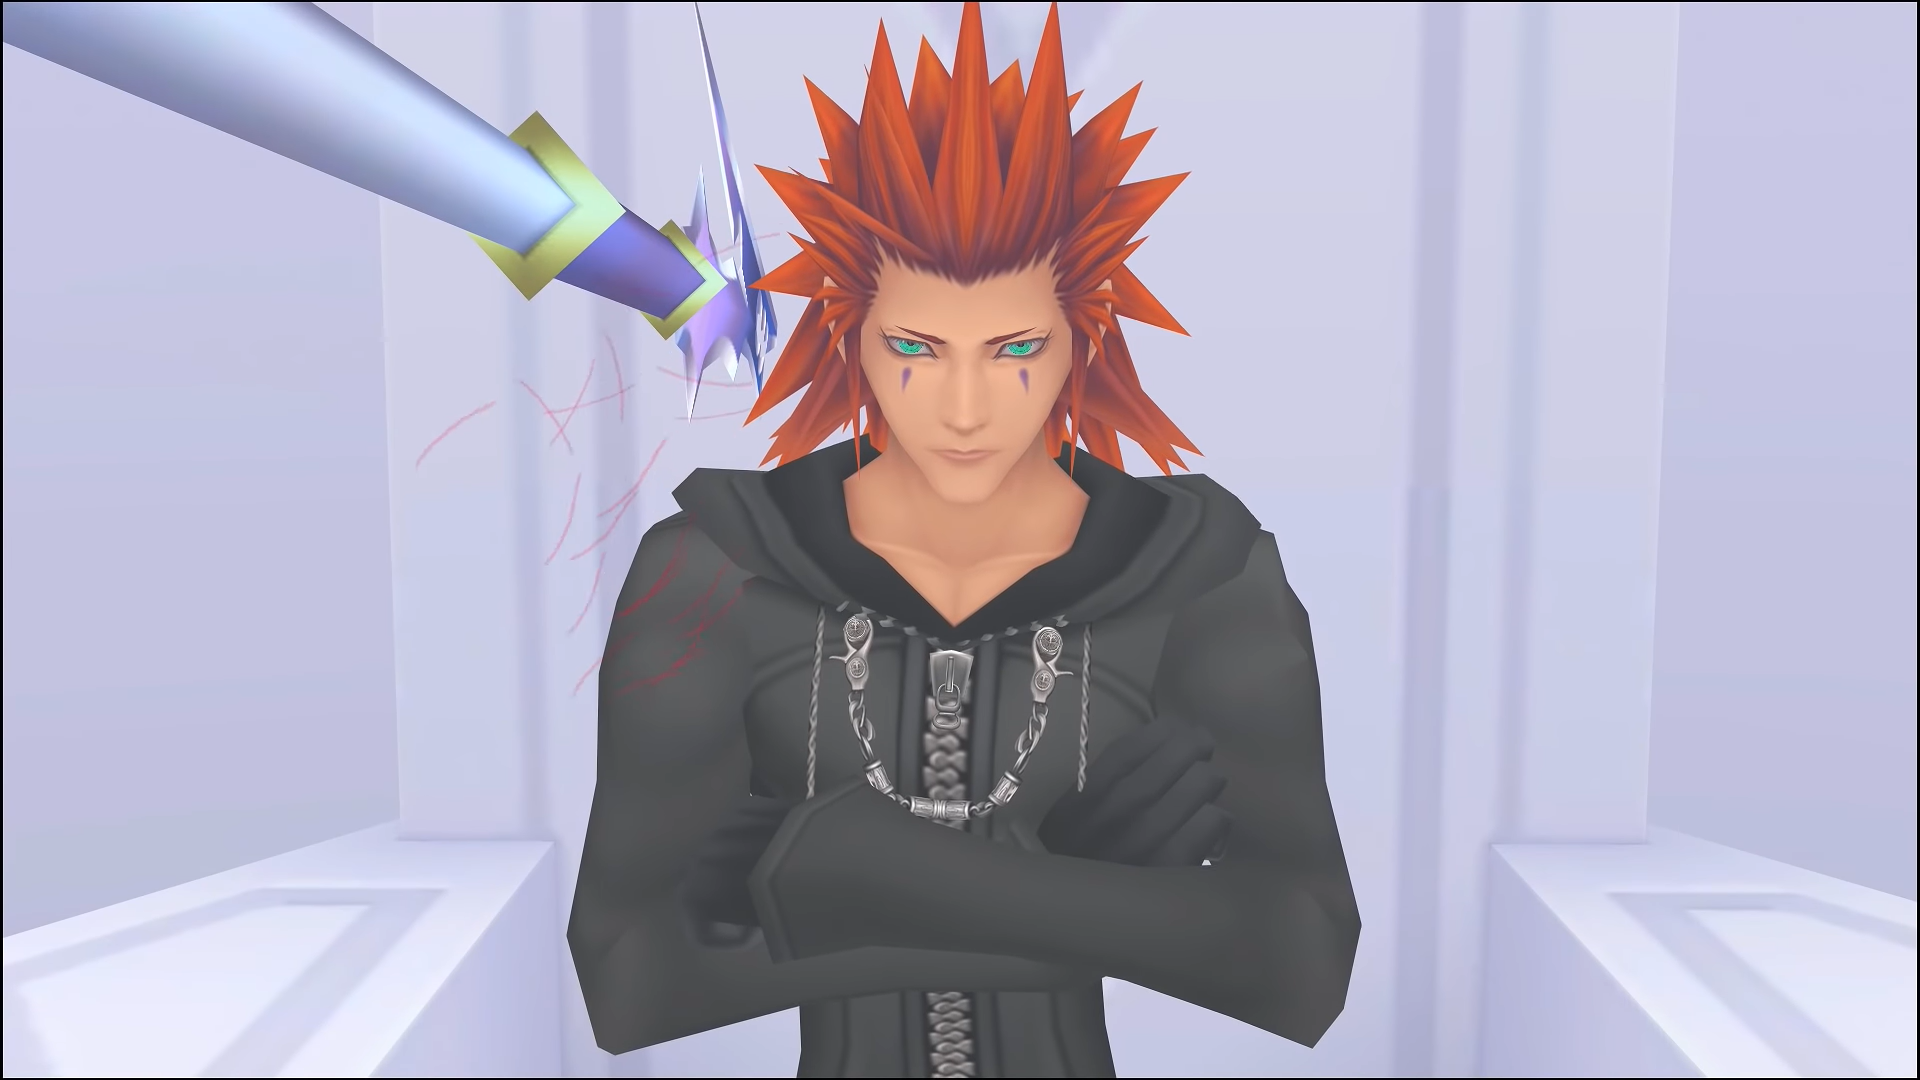 "kingdom Hearts II". 2007. Square Enix. Axel is threatened with a lance.